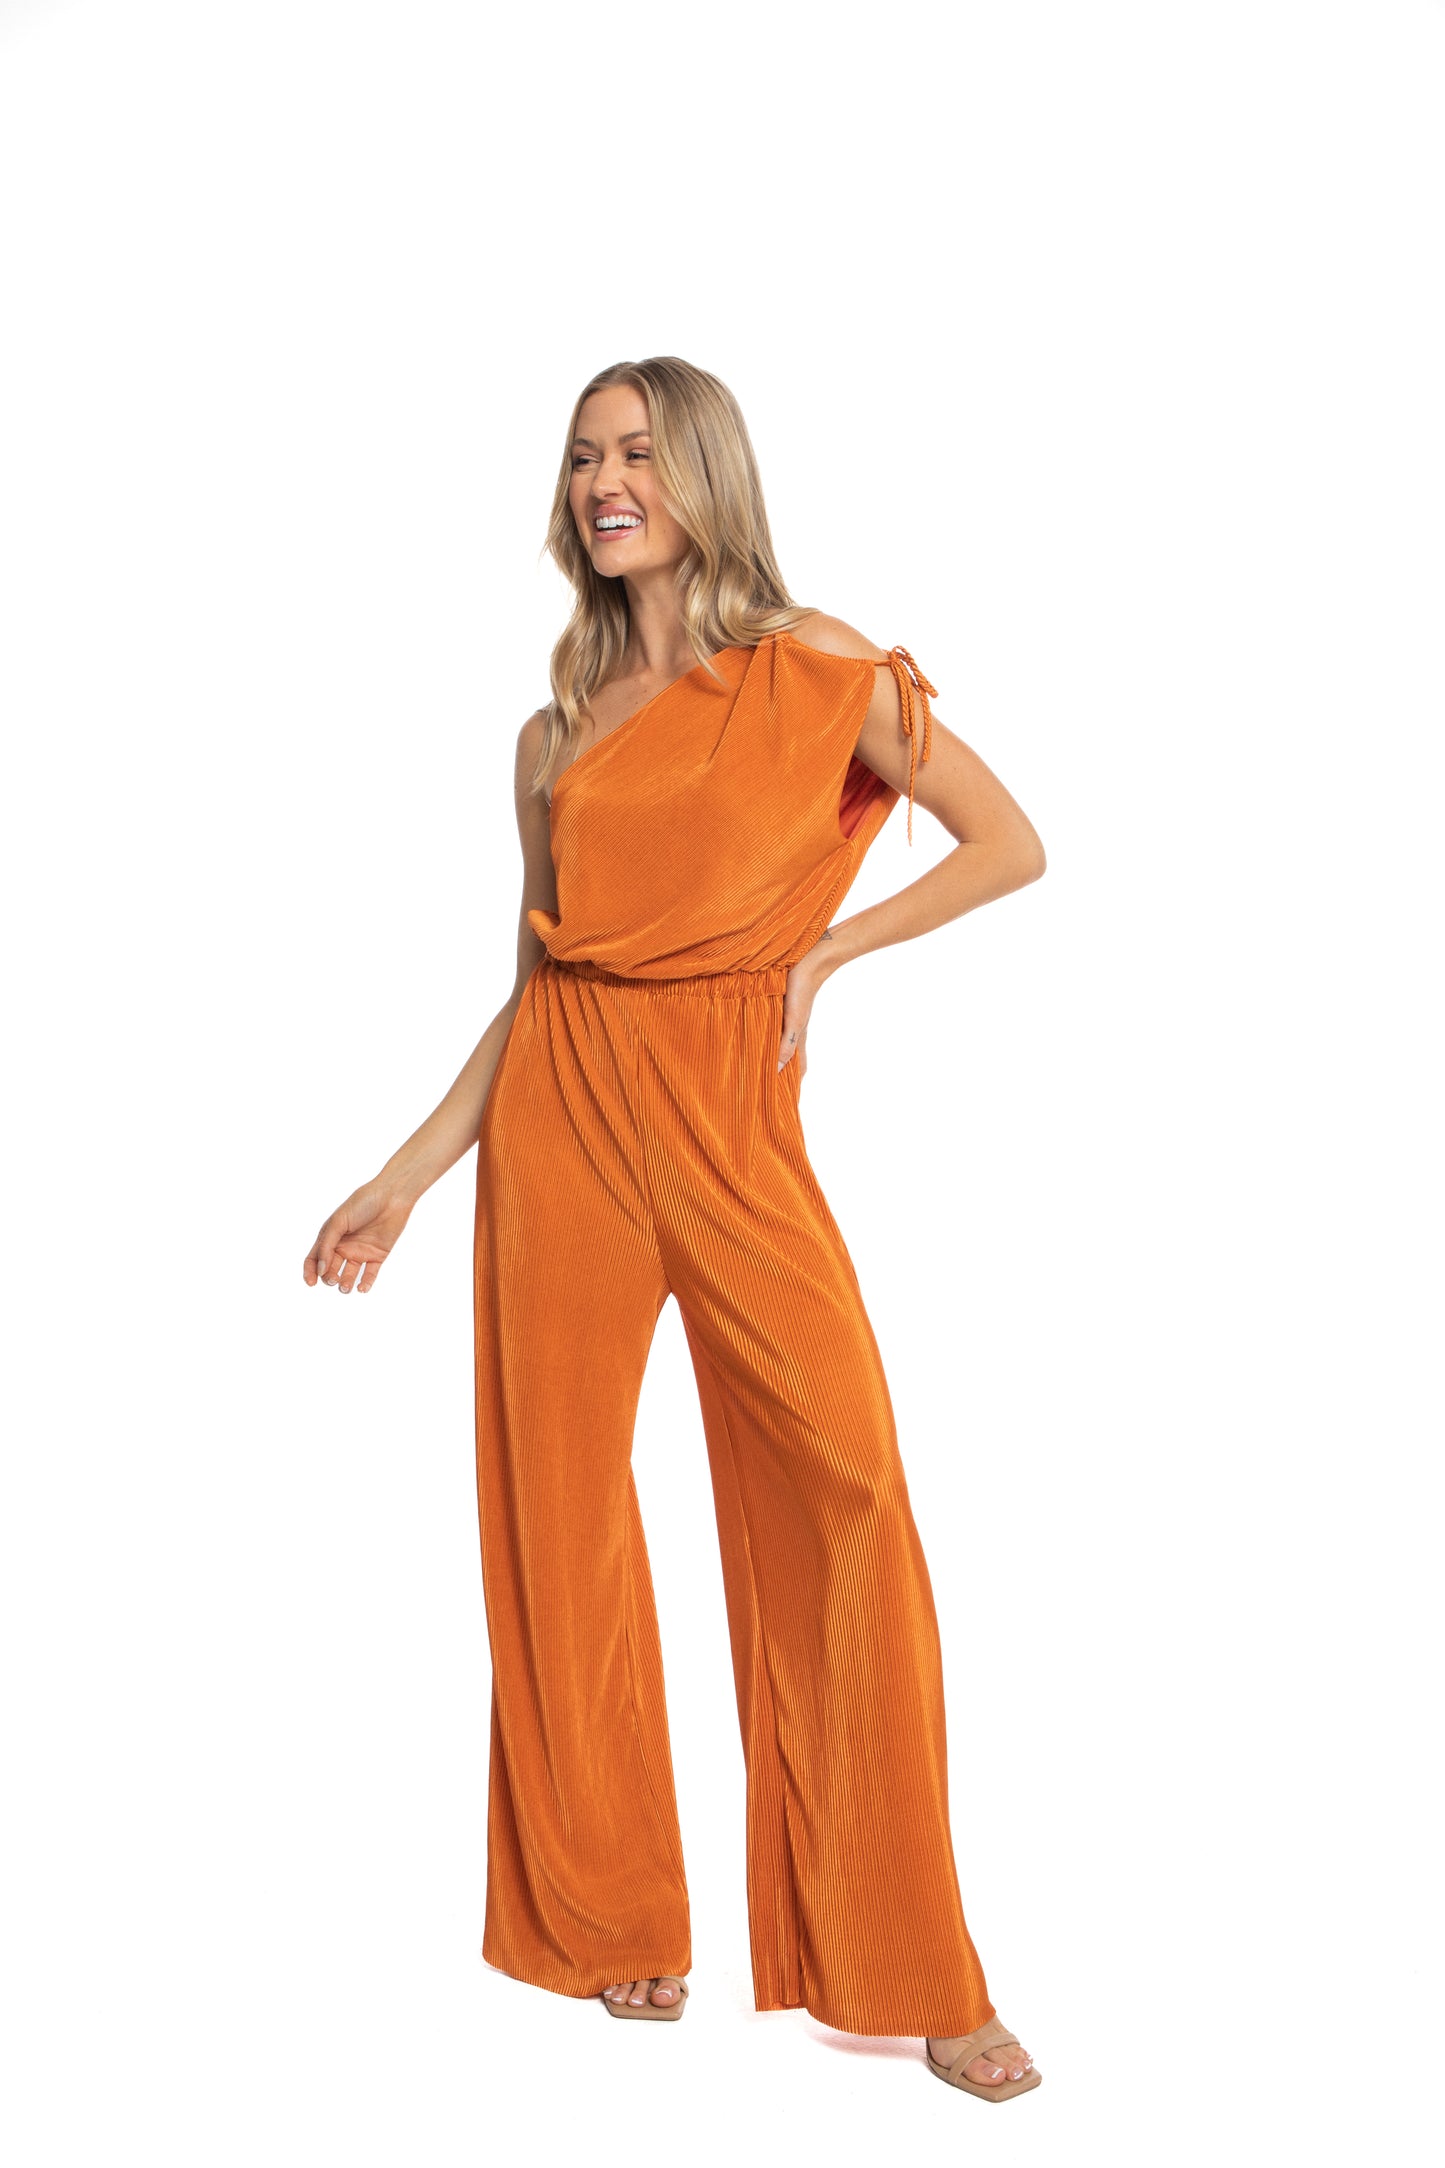 Zaria One Shoulder Drawstring Jumpsuit in Pleated Fabric